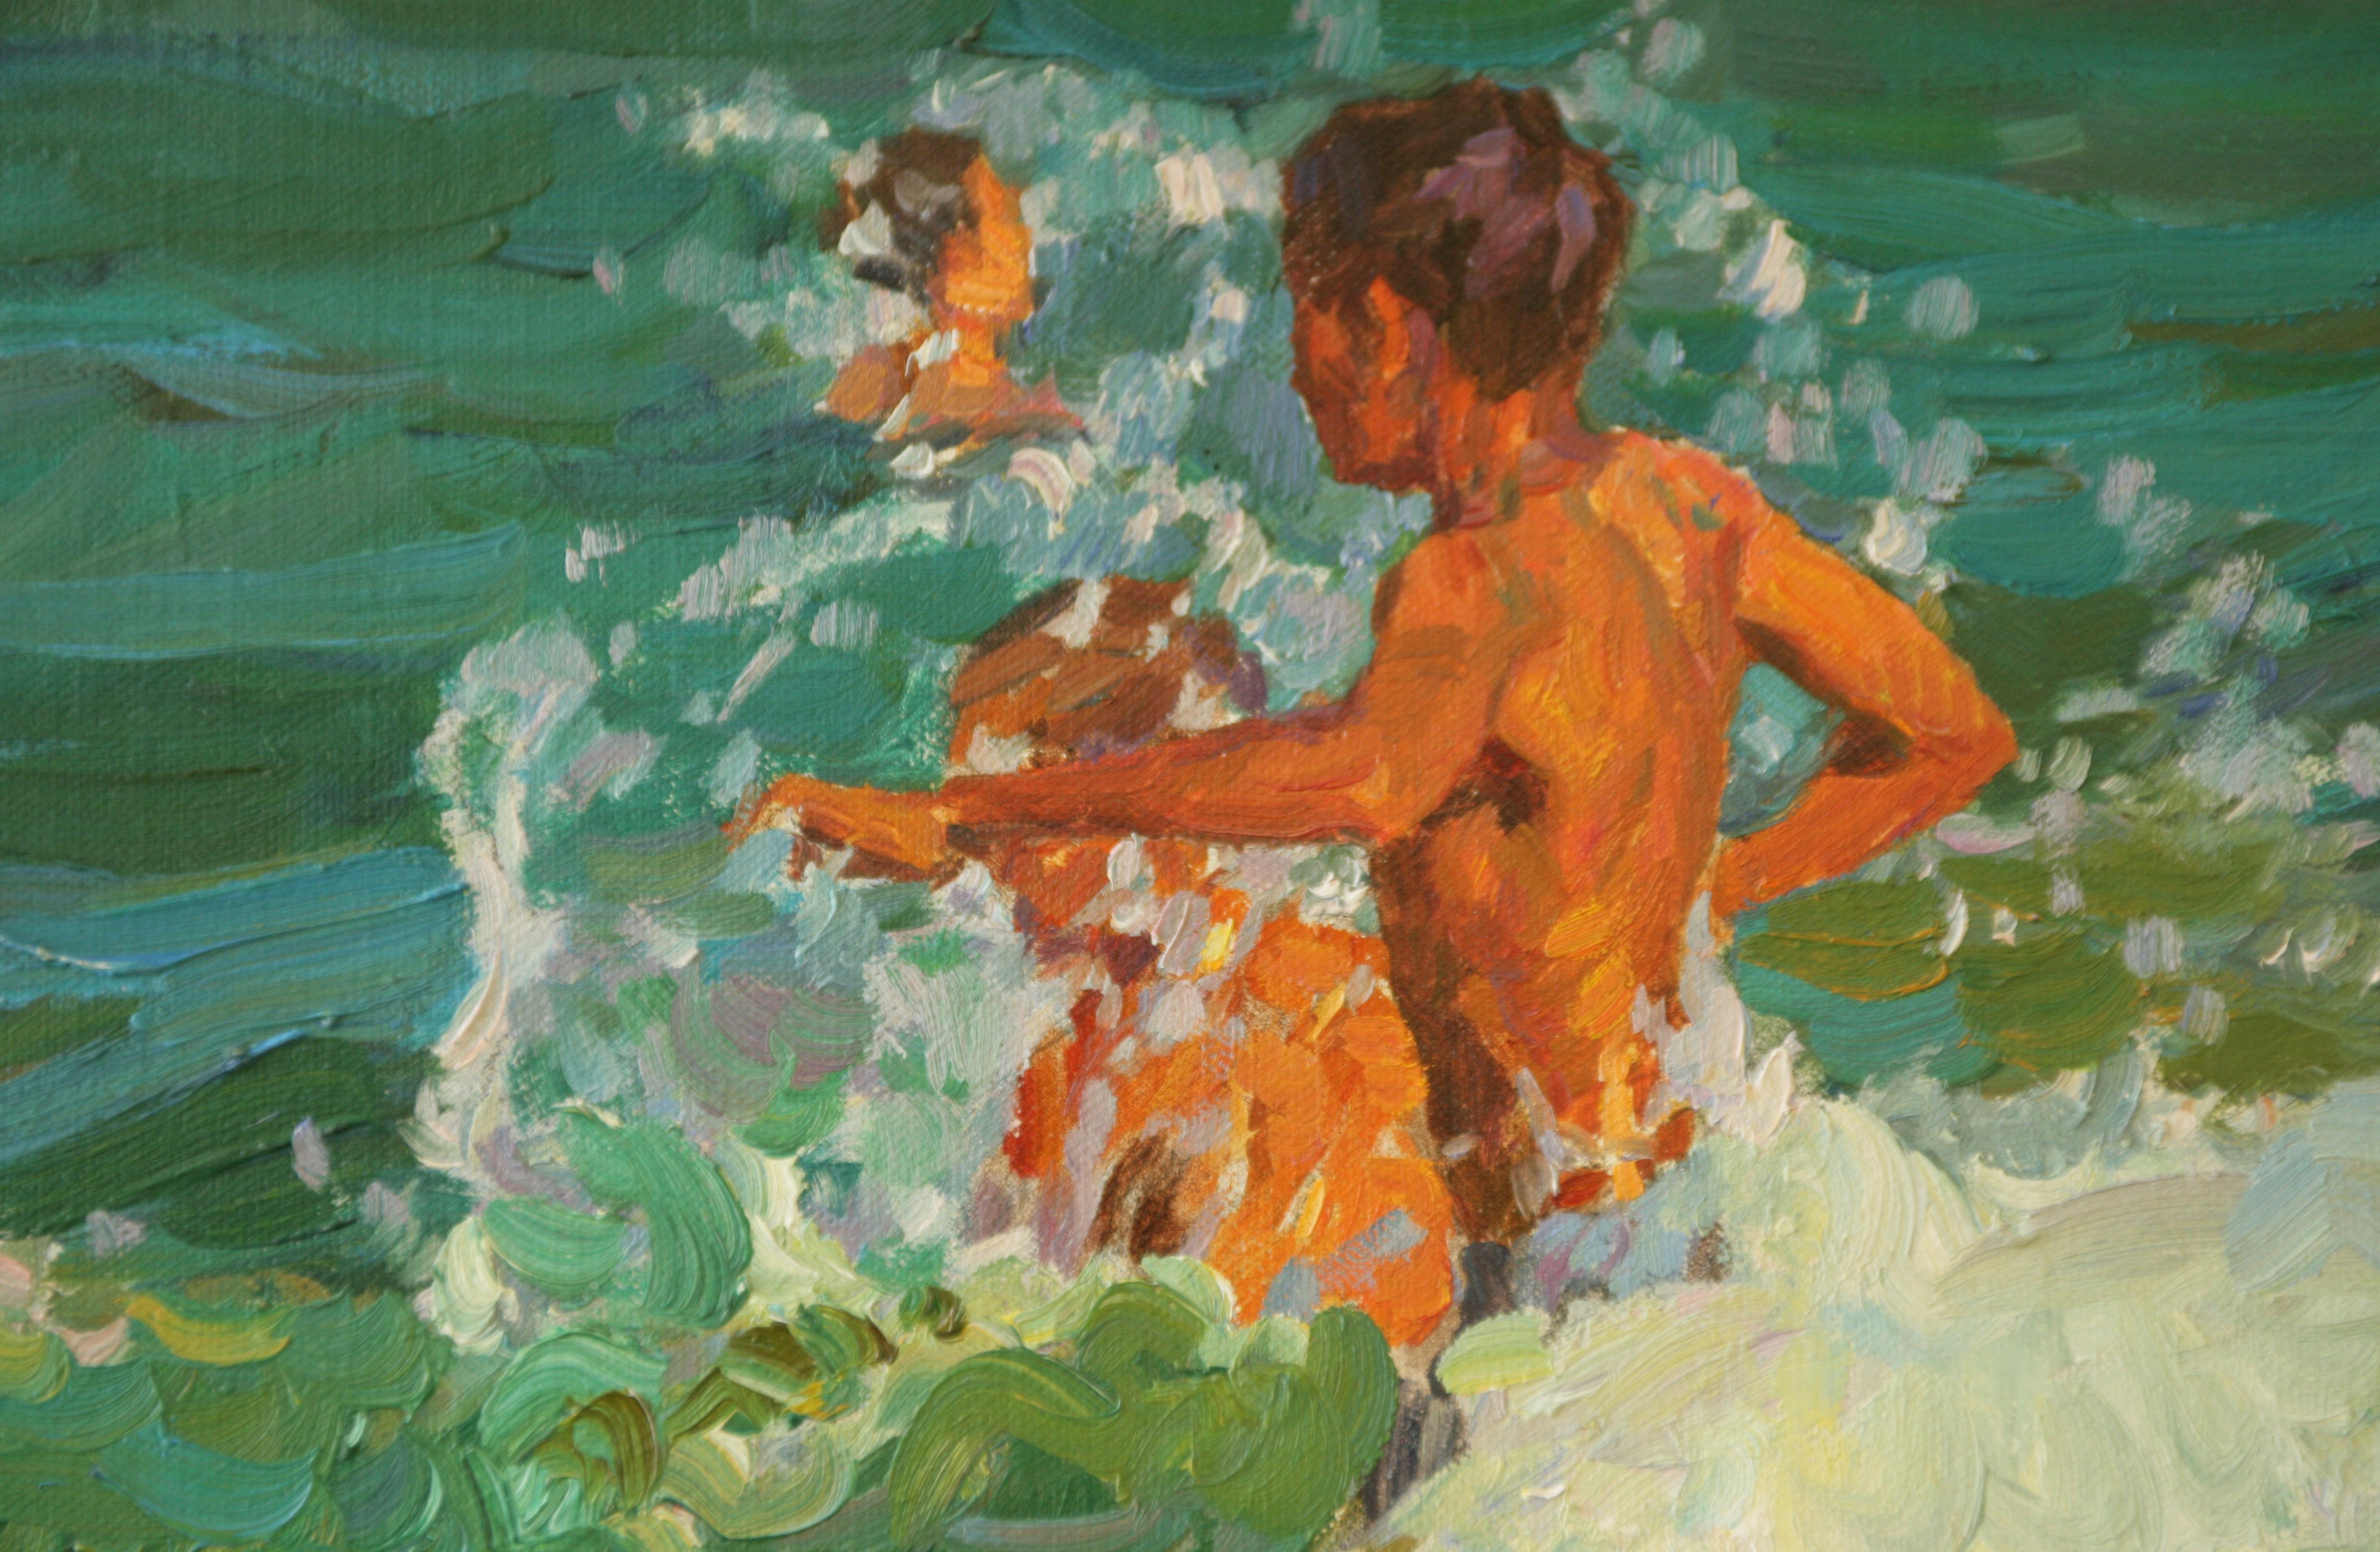  Jumping Waves , , Yuri Krotov contemporary Russian Impressionist oil painting   For Sale 4